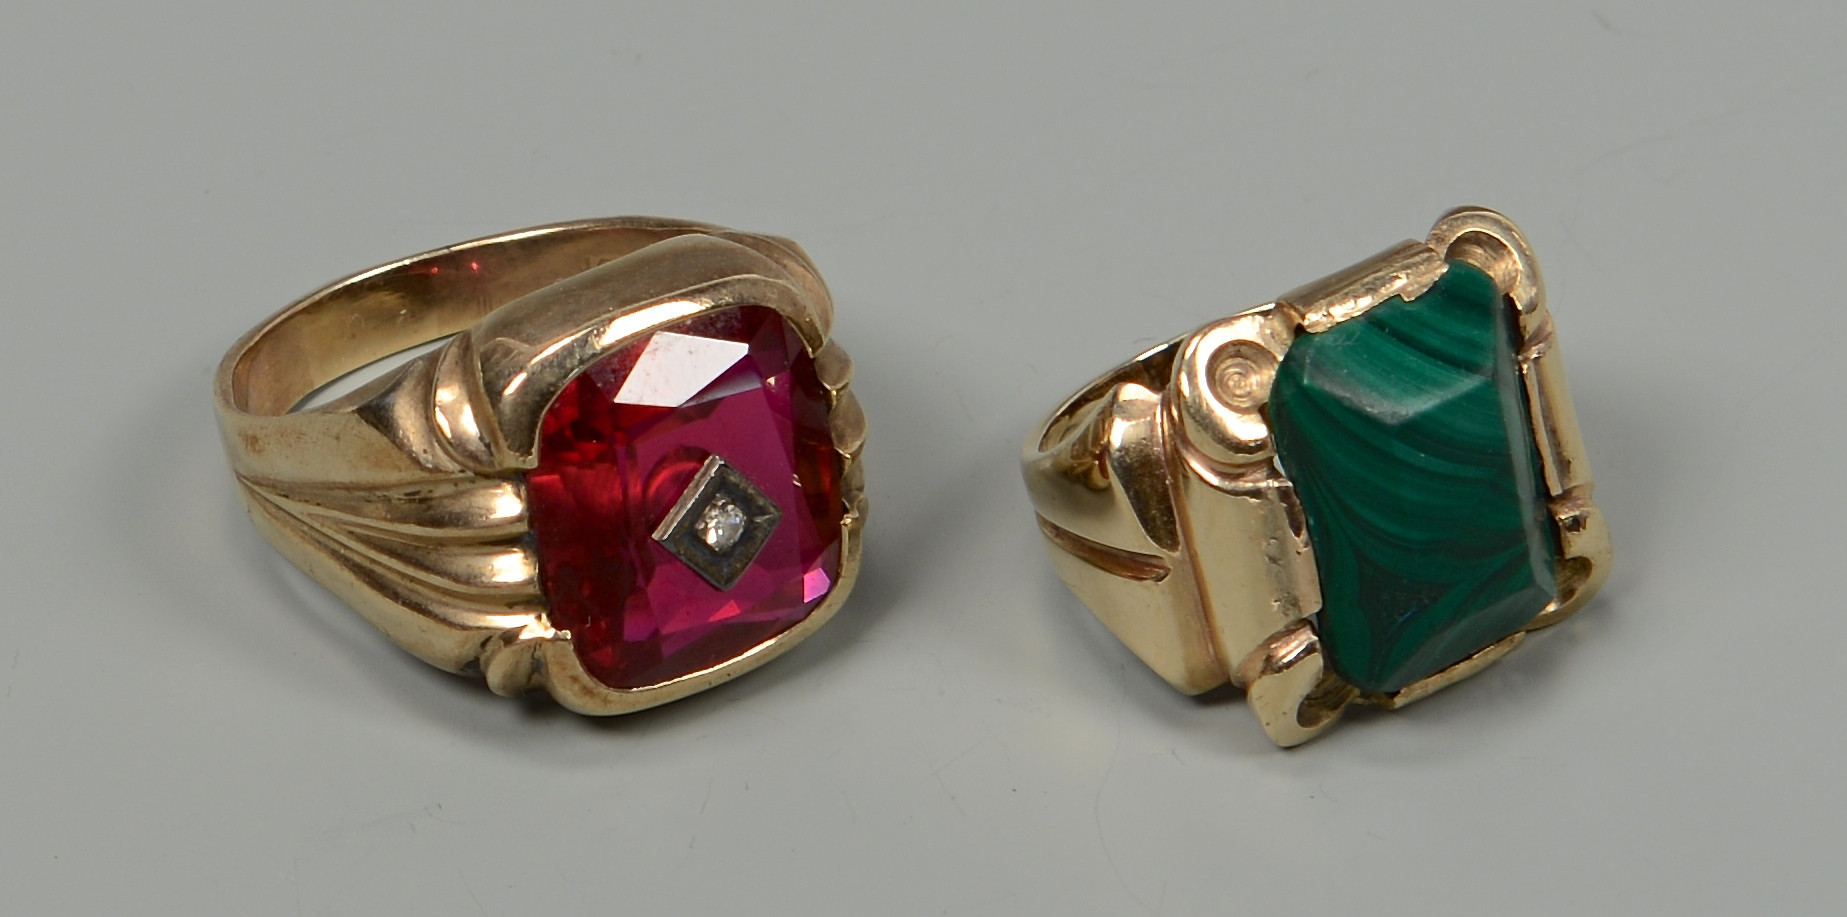 Lot 594: 5 Articles of Vintage Jewelry